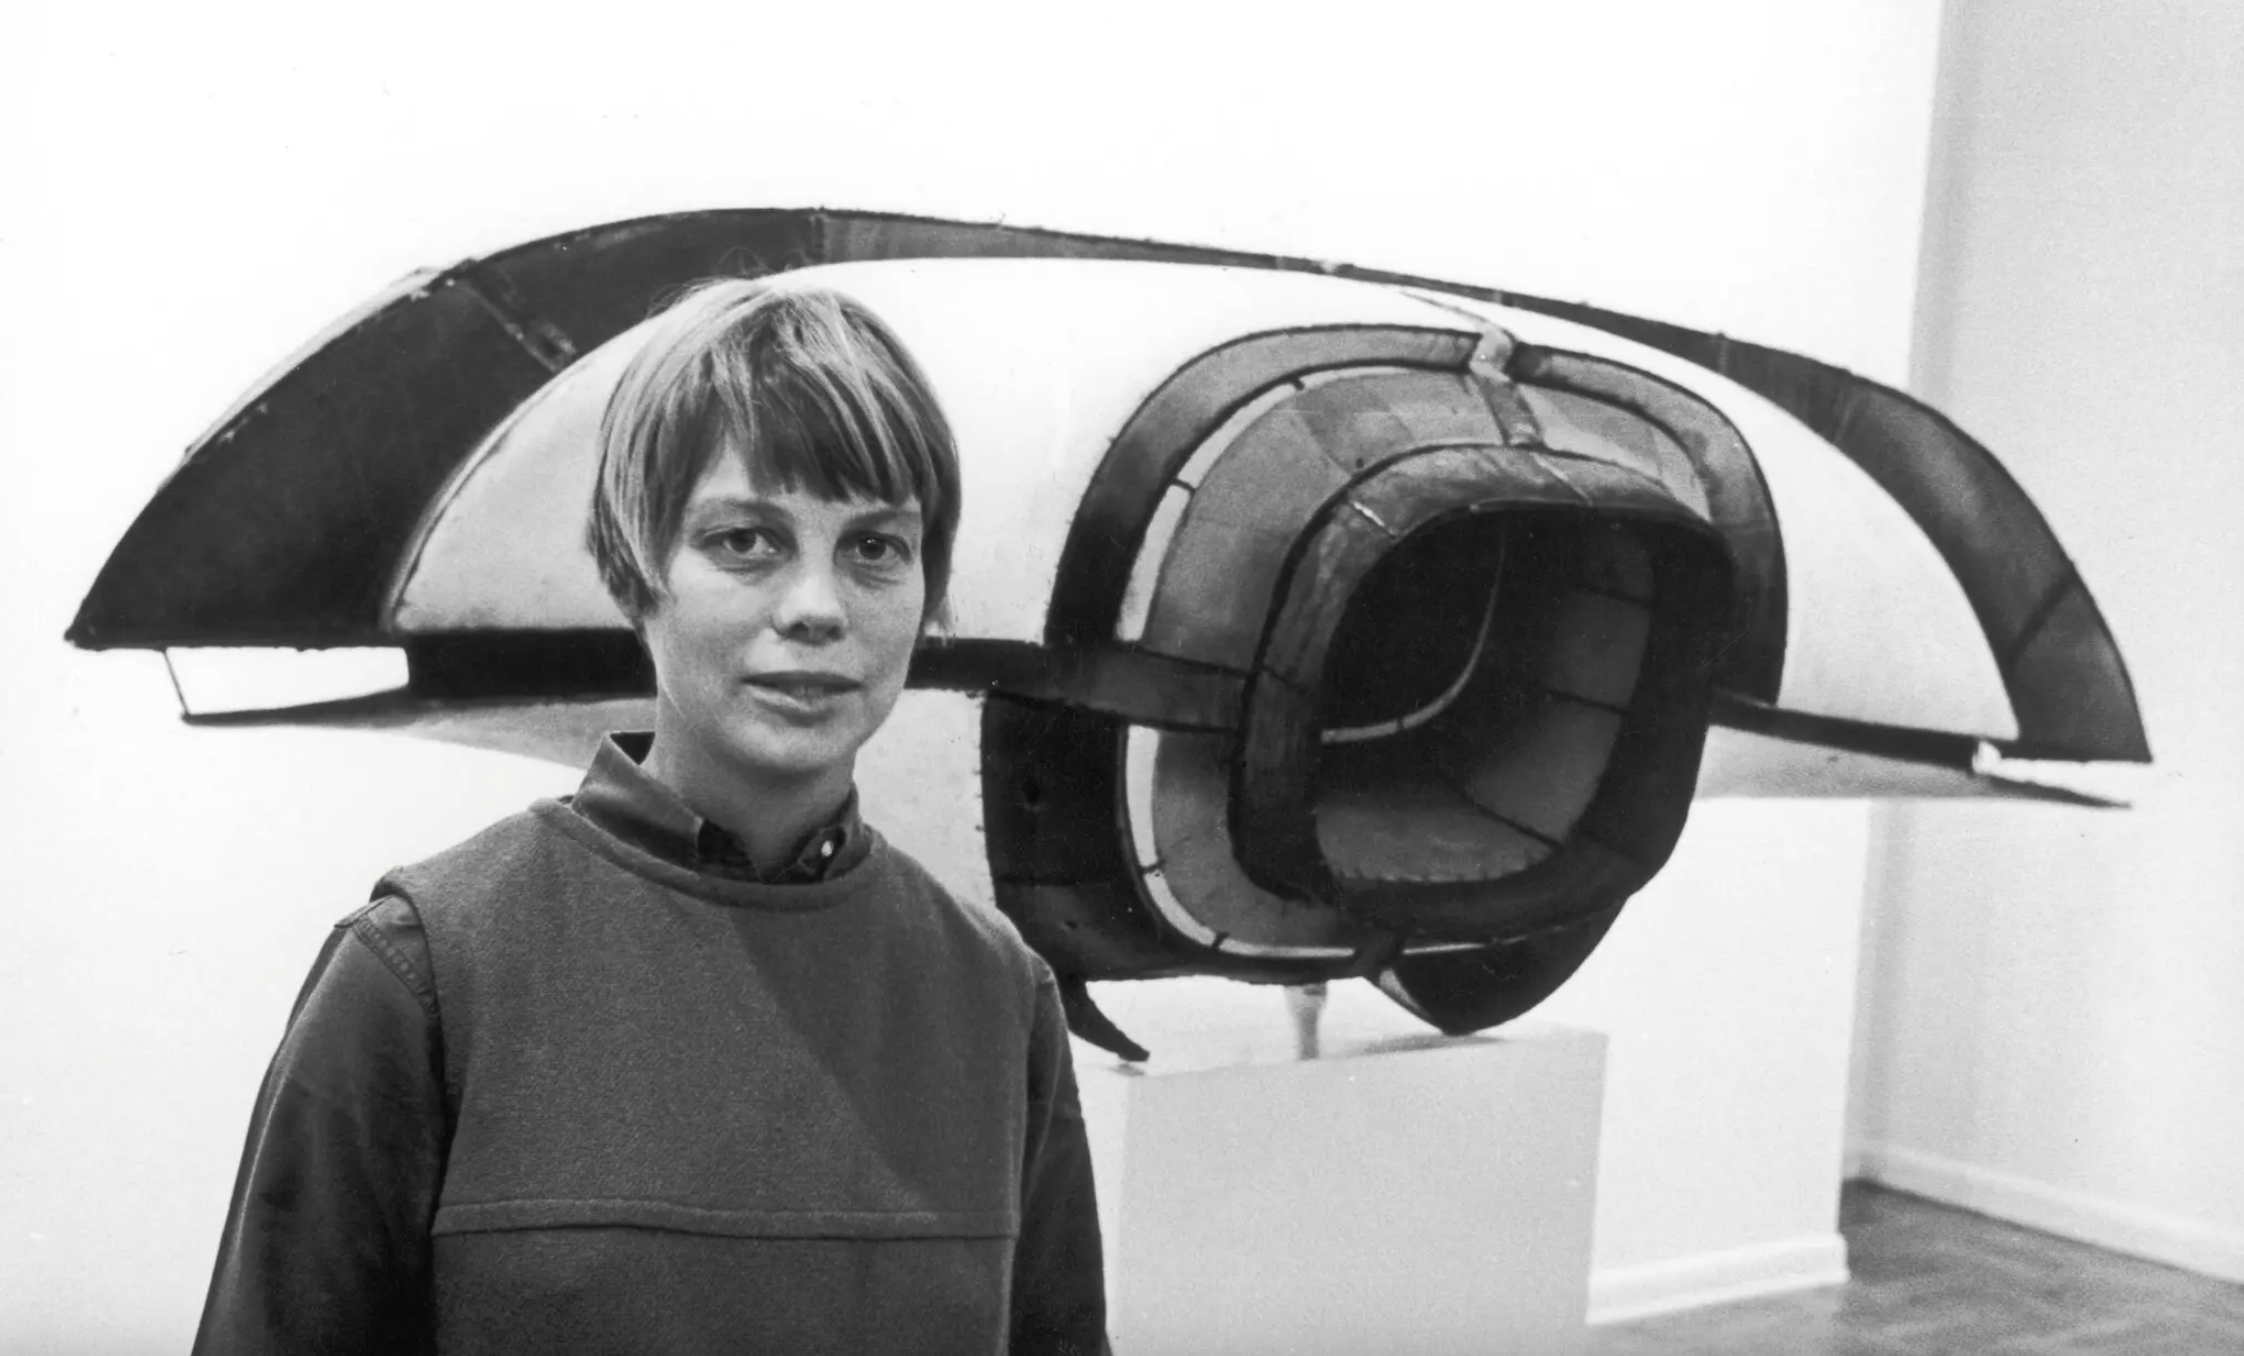 A black-and-white photograph of a woman with a light skin tone standing in front of a sculpture. The woman has blonde, short hair and looks directly into the camera. The sculpture is made from metal and resembles parts of an airplane.